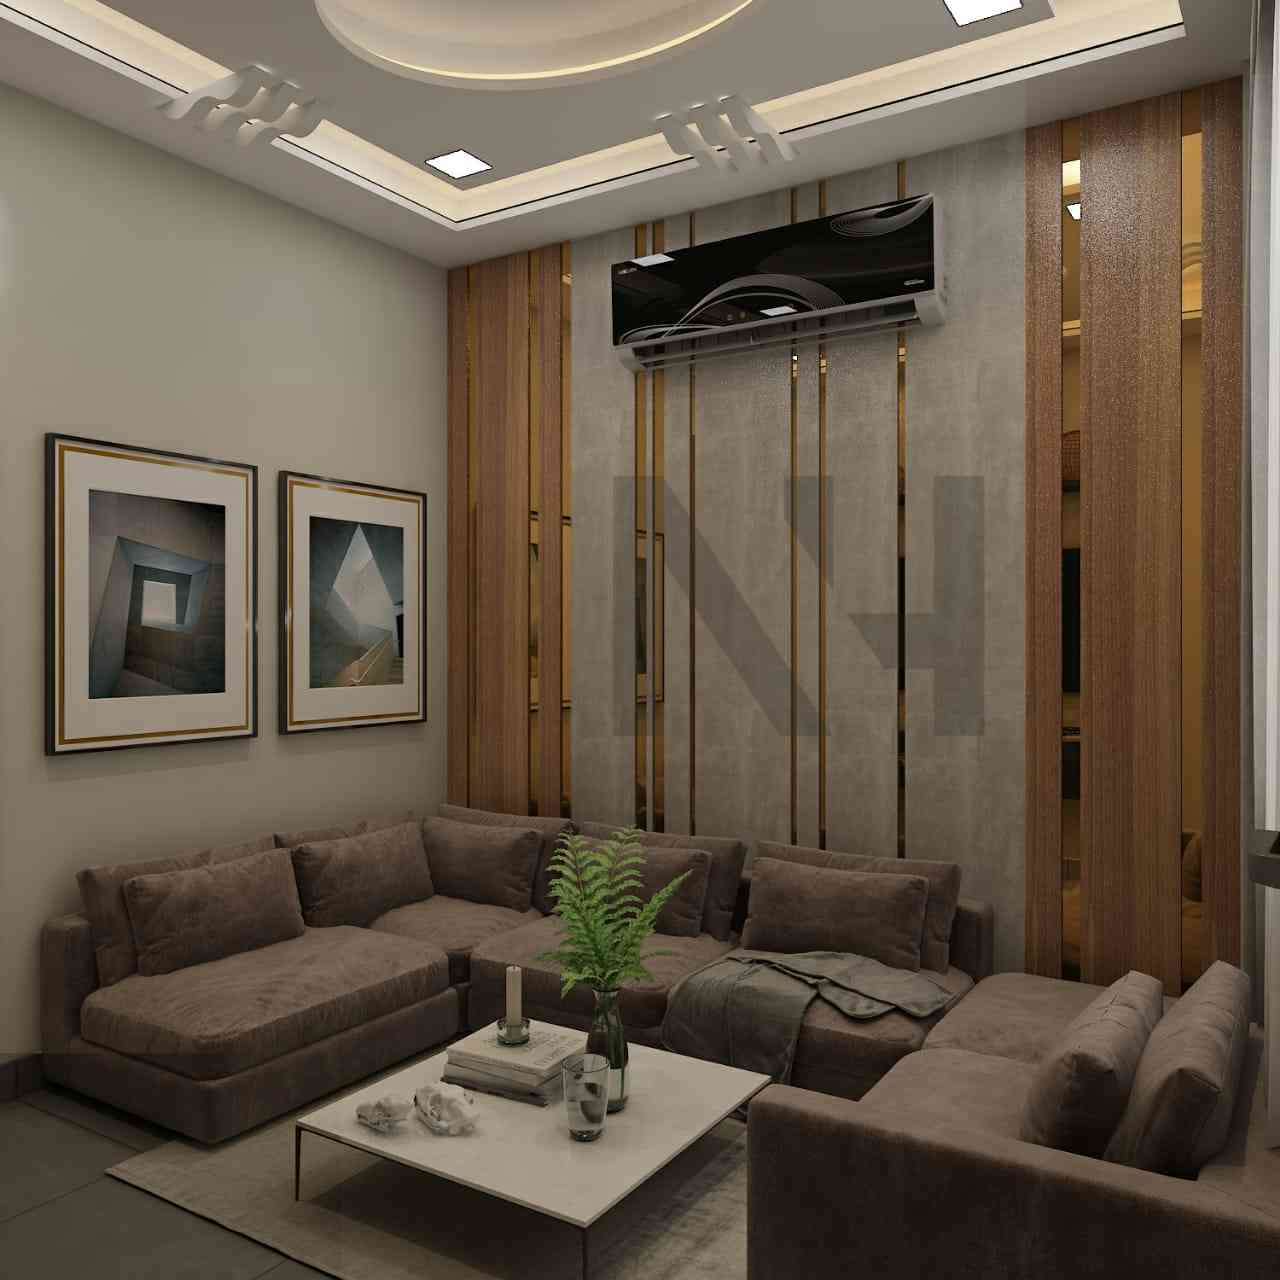 Living Room Design With Ceiling